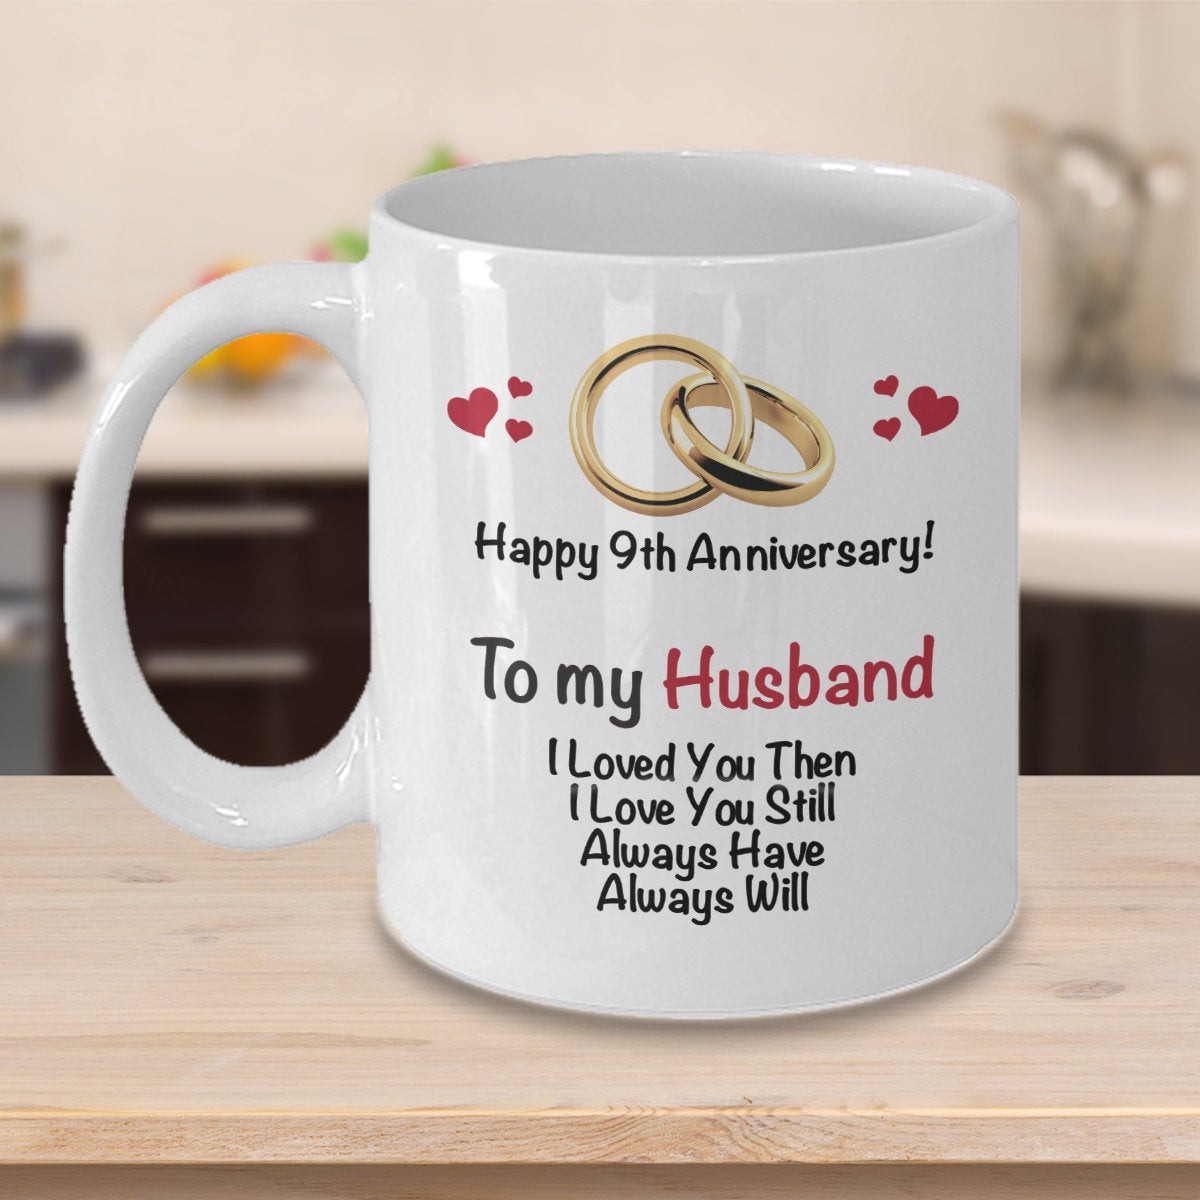 Ninth Anniversary Gift Ideas
 9th Anniversary Gift Ideas for Husband 9th Wedding